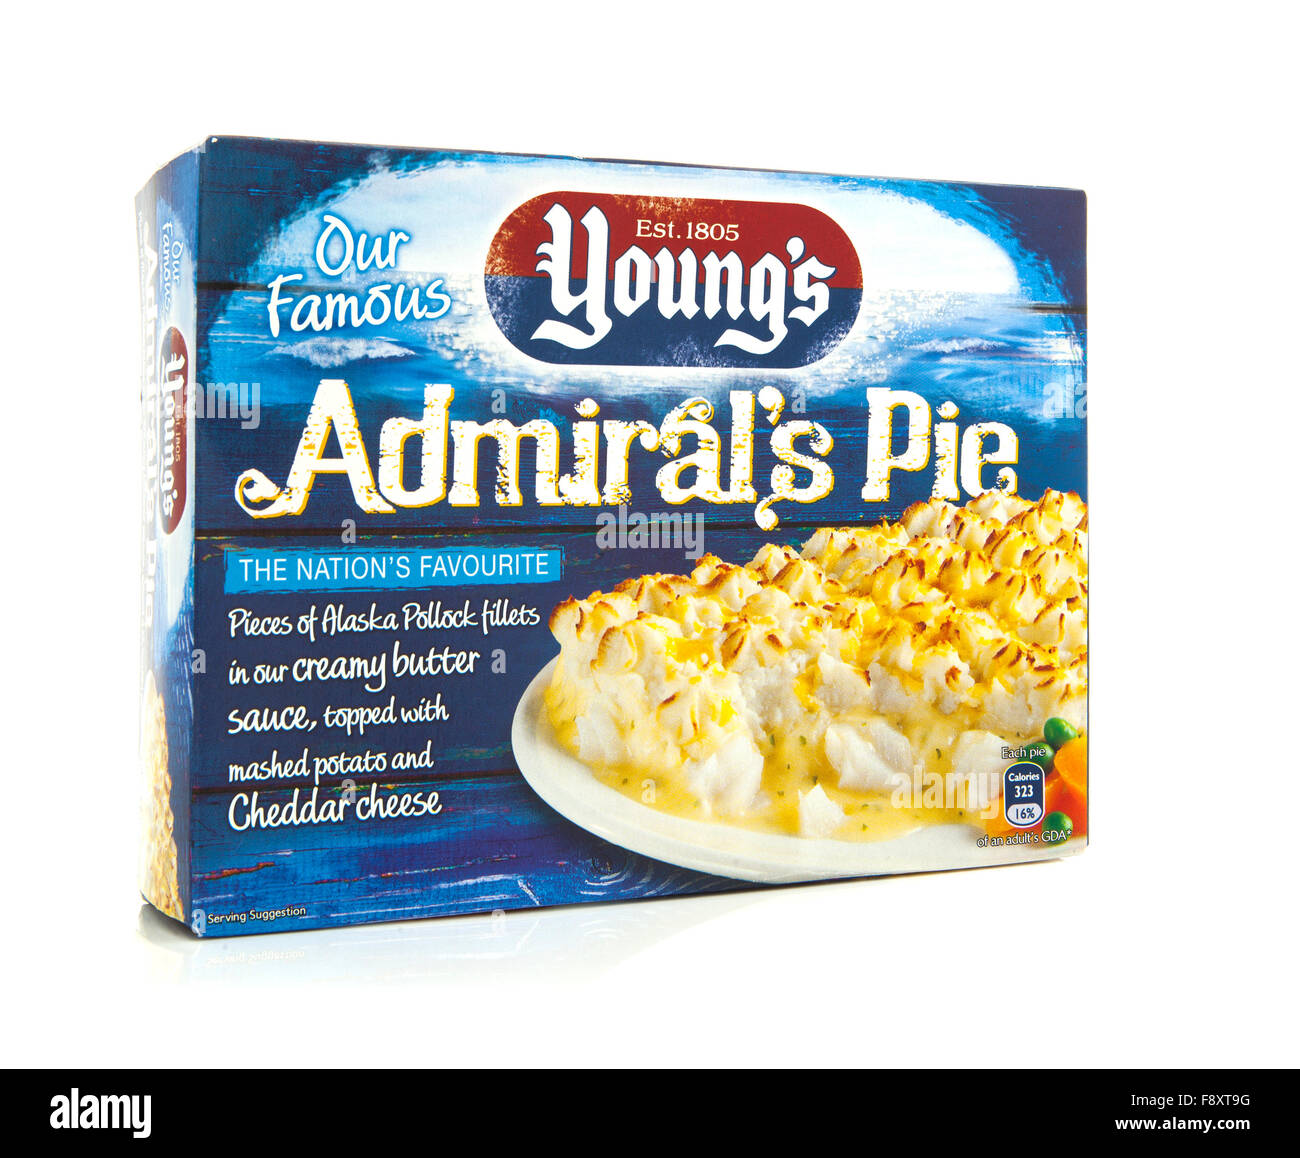 Young's Admirals Pie on a white background Stock Photo